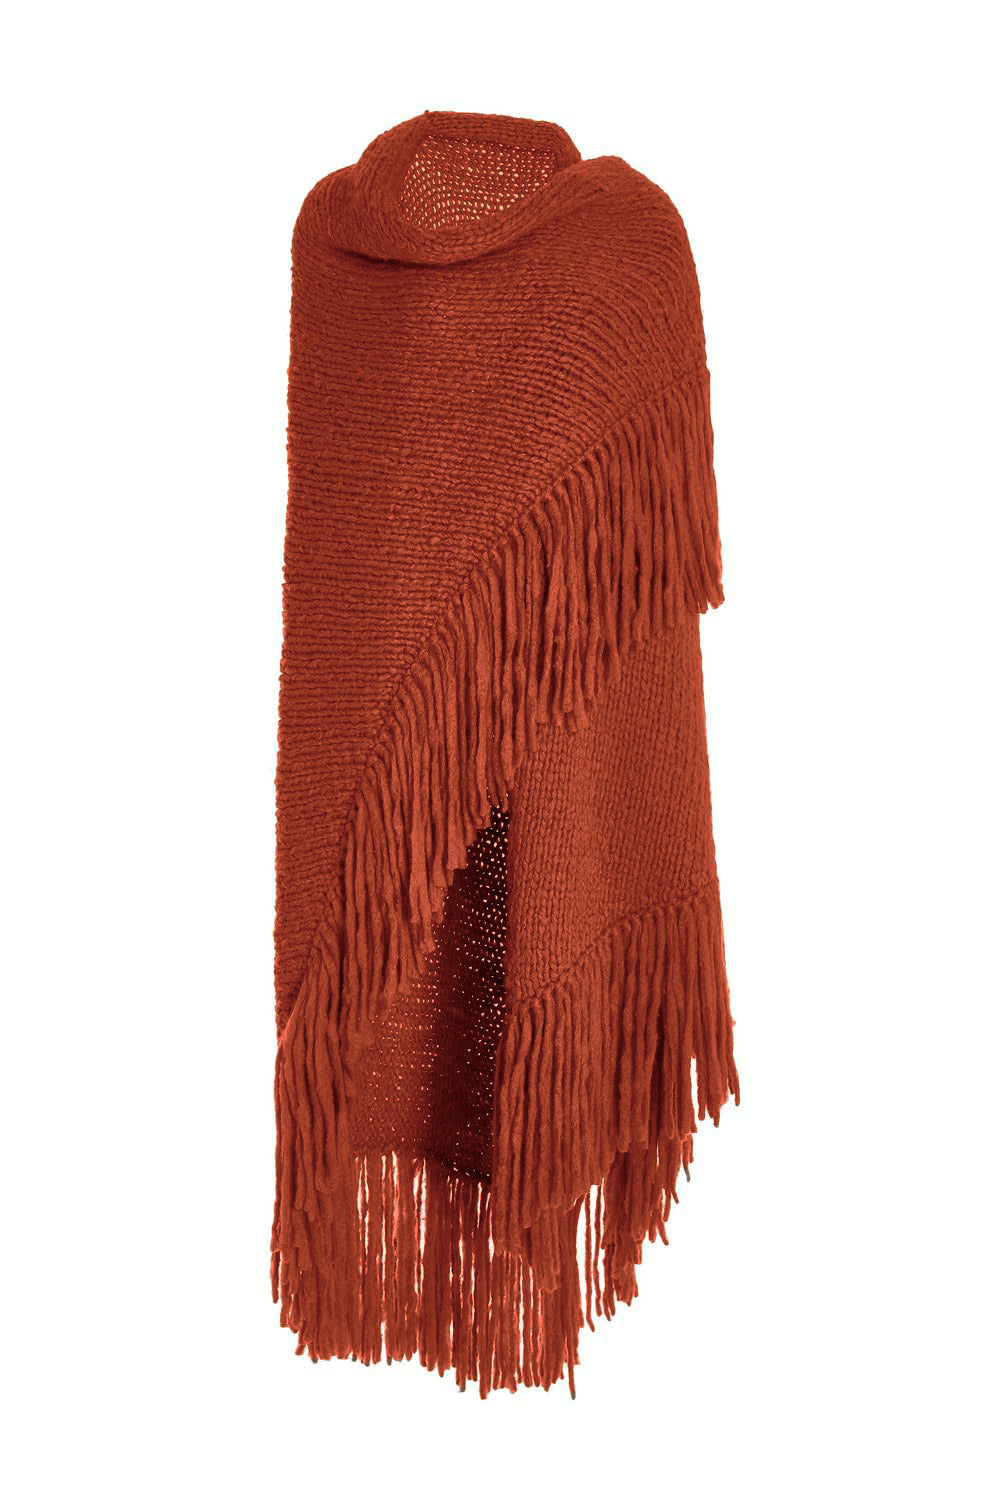 Buy Hand-knitted red scarf made of high quality wool